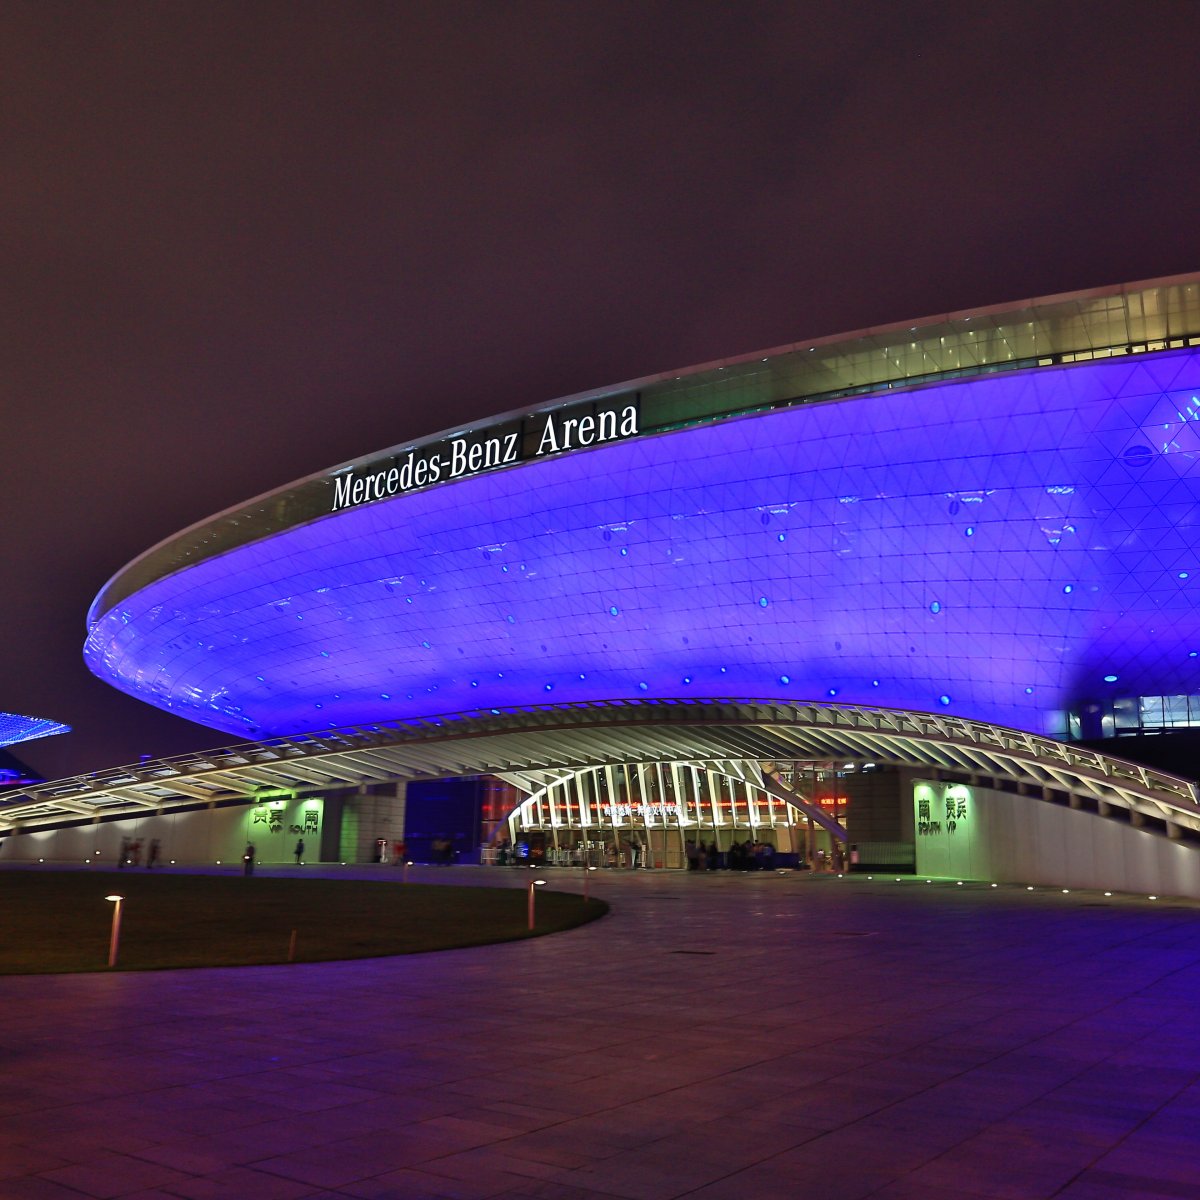 Exterior Image of Mercedes-Benz Arena in China at night